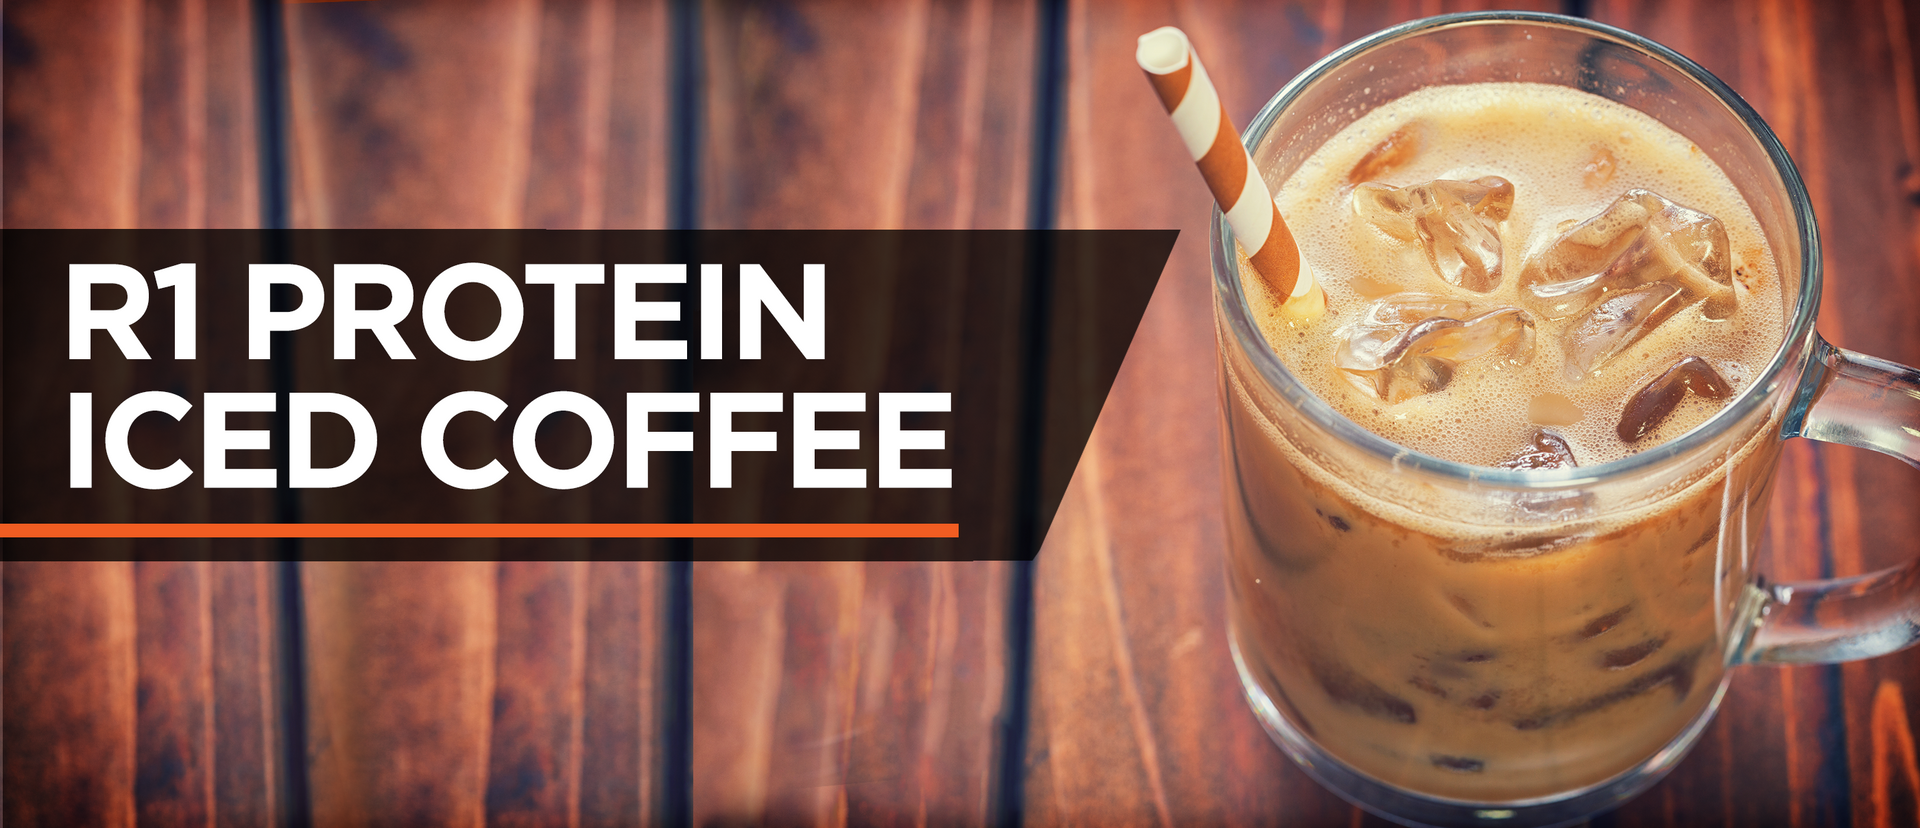 R1 PROTEIN ICED COFFEE